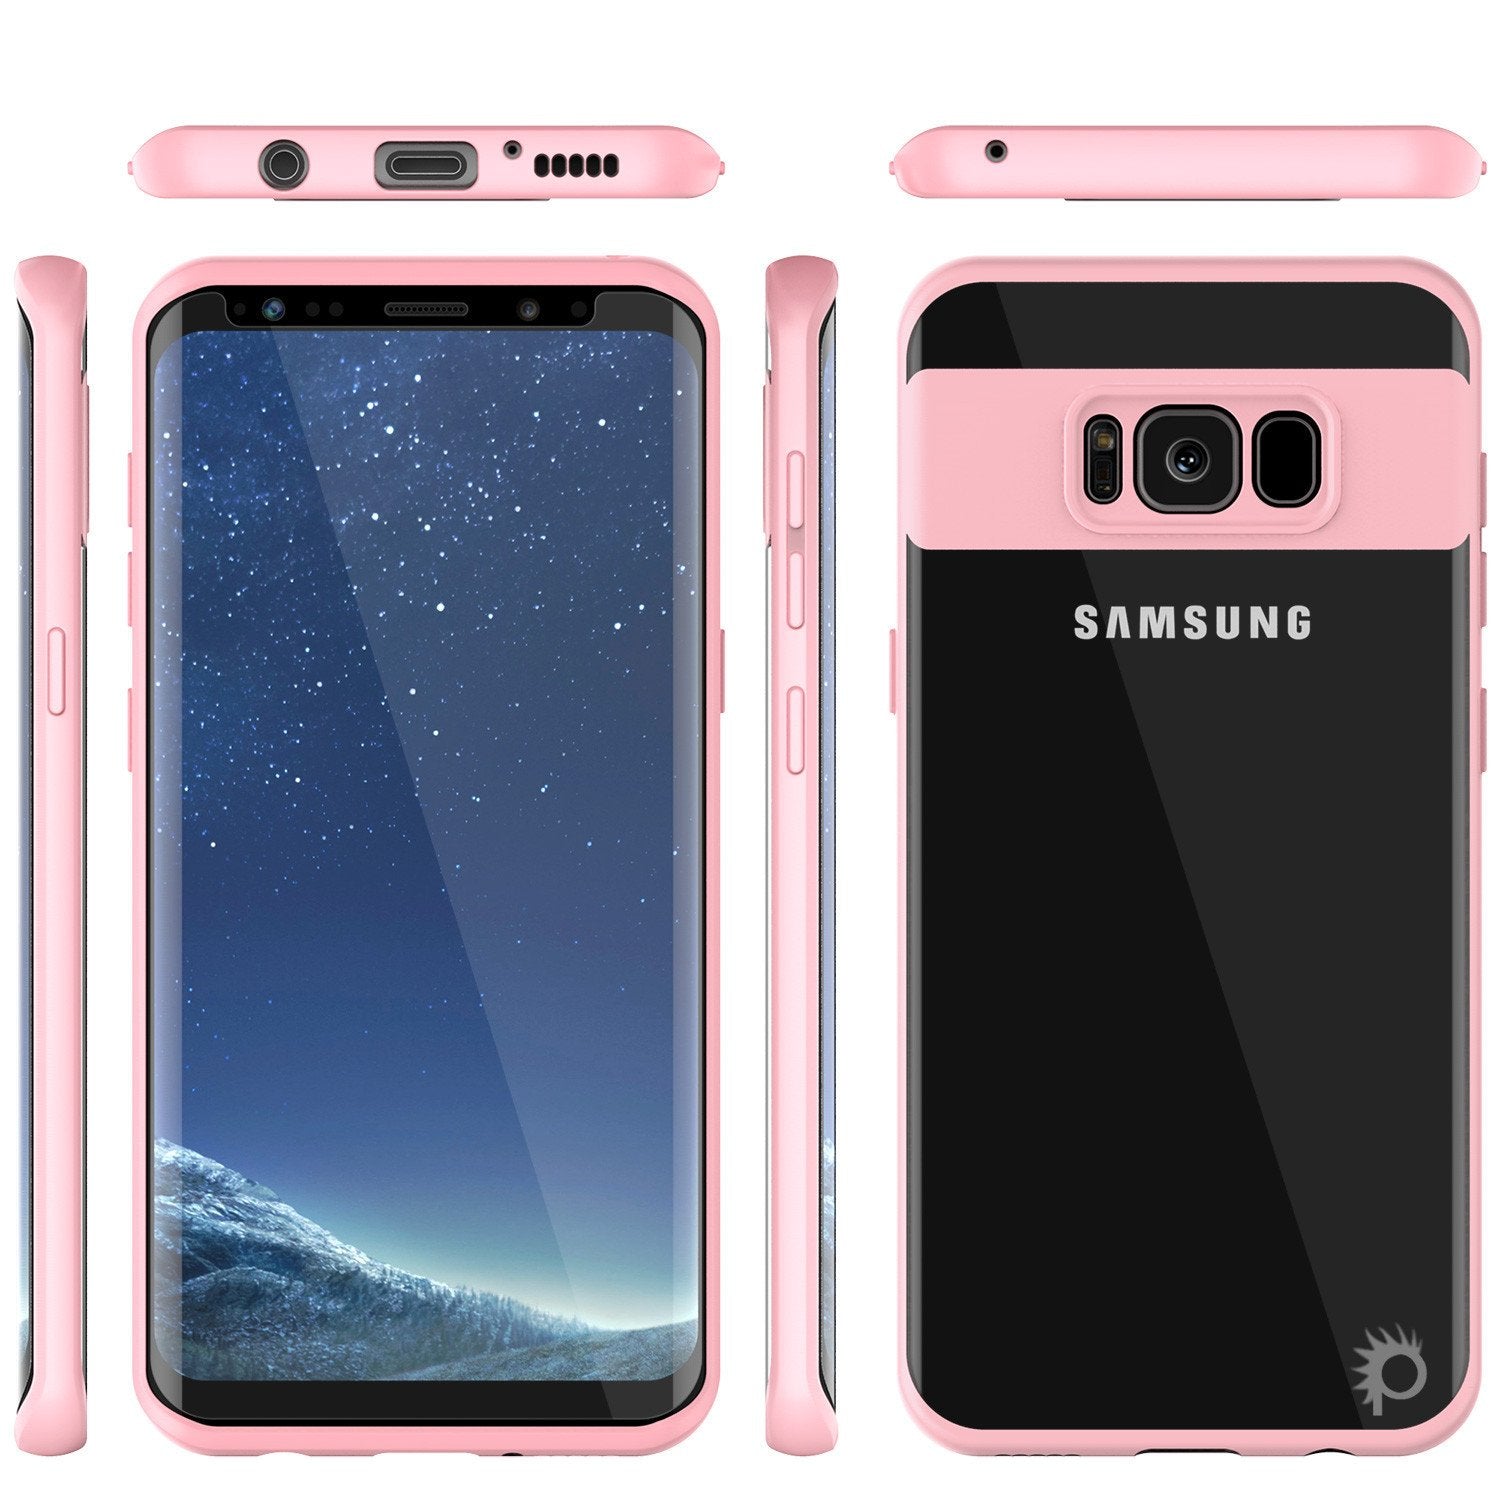 Galaxy S8 Plus Case, Punkcase [MASK Series] [PINK] Full Body Hybrid Dual Layer TPU Cover W/ Protective PUNKSHIELD Screen Protector - PunkCase NZ